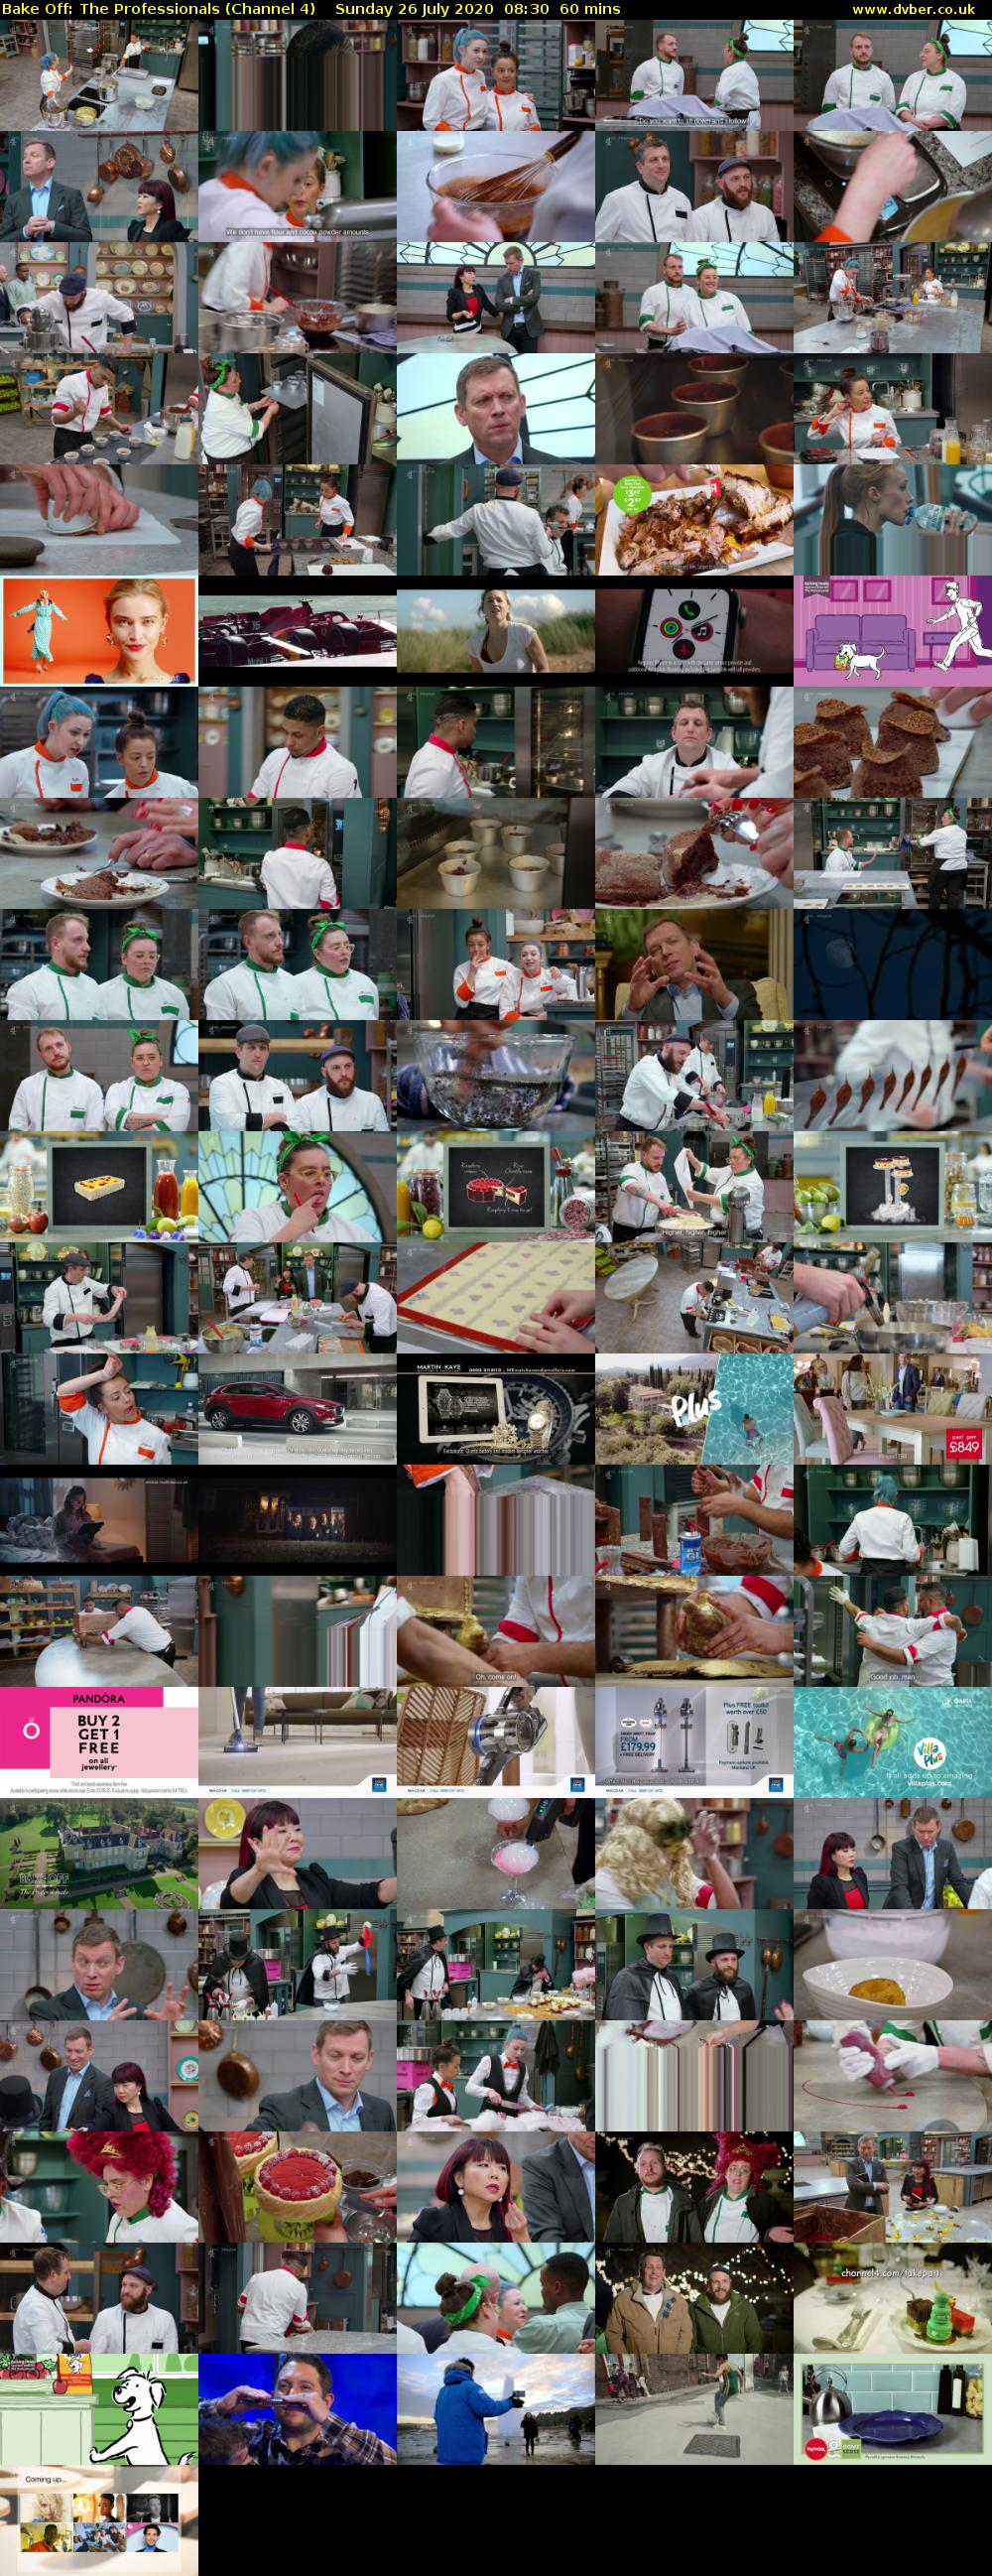 Bake Off: The Professionals (Channel 4) Sunday 26 July 2020 08:30 - 09:30